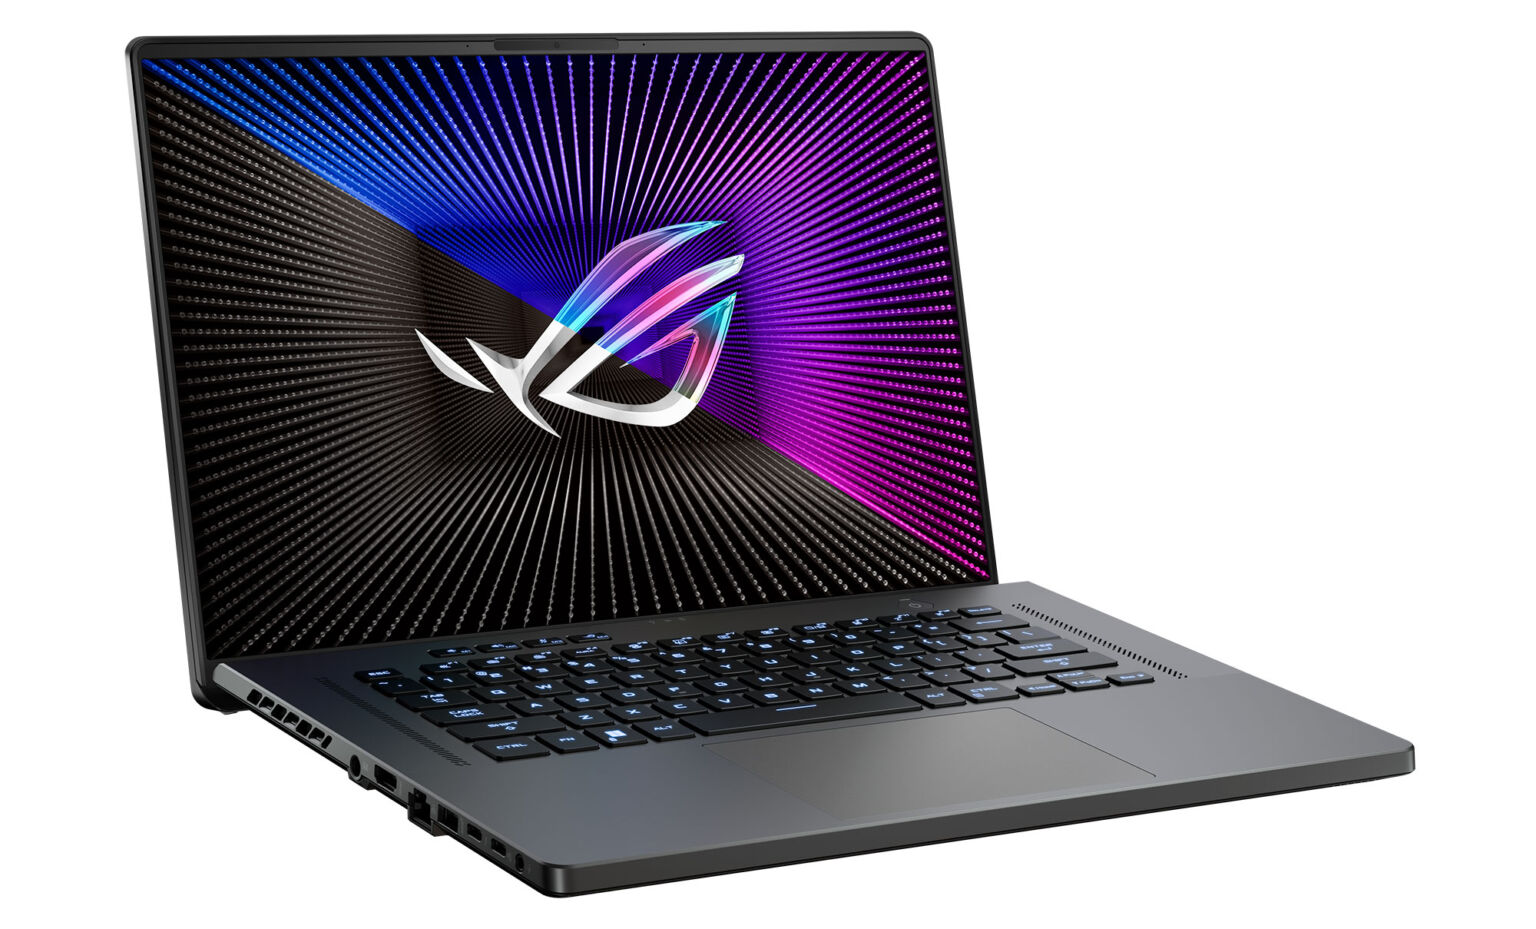 2023 ASUS ROG Zephyrus G16 GU603 what to expect